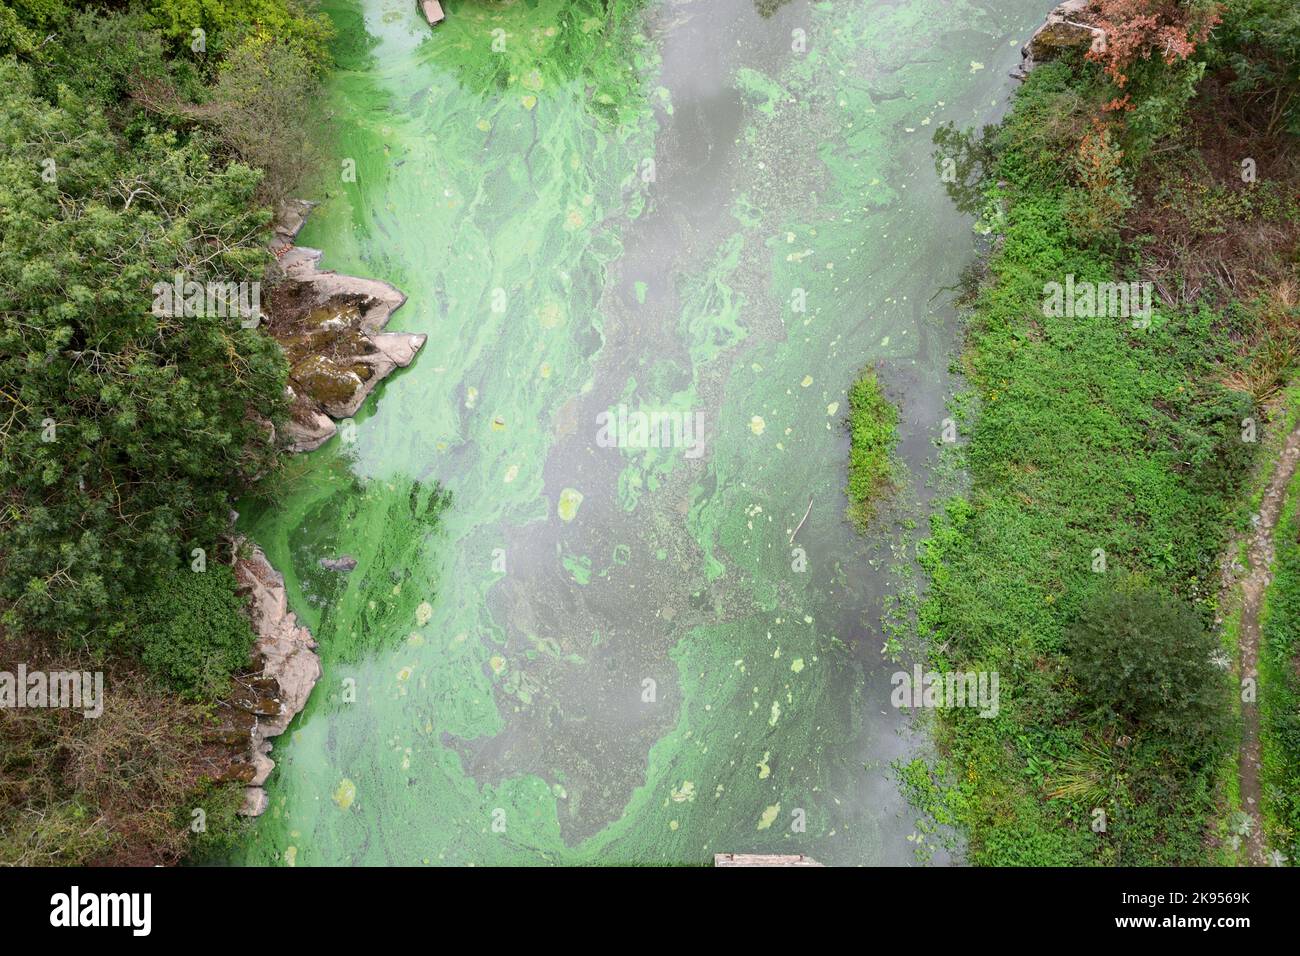 lake with cyanobacteria, Le Gouessant, France, Brittany, Hillion Stock Photo